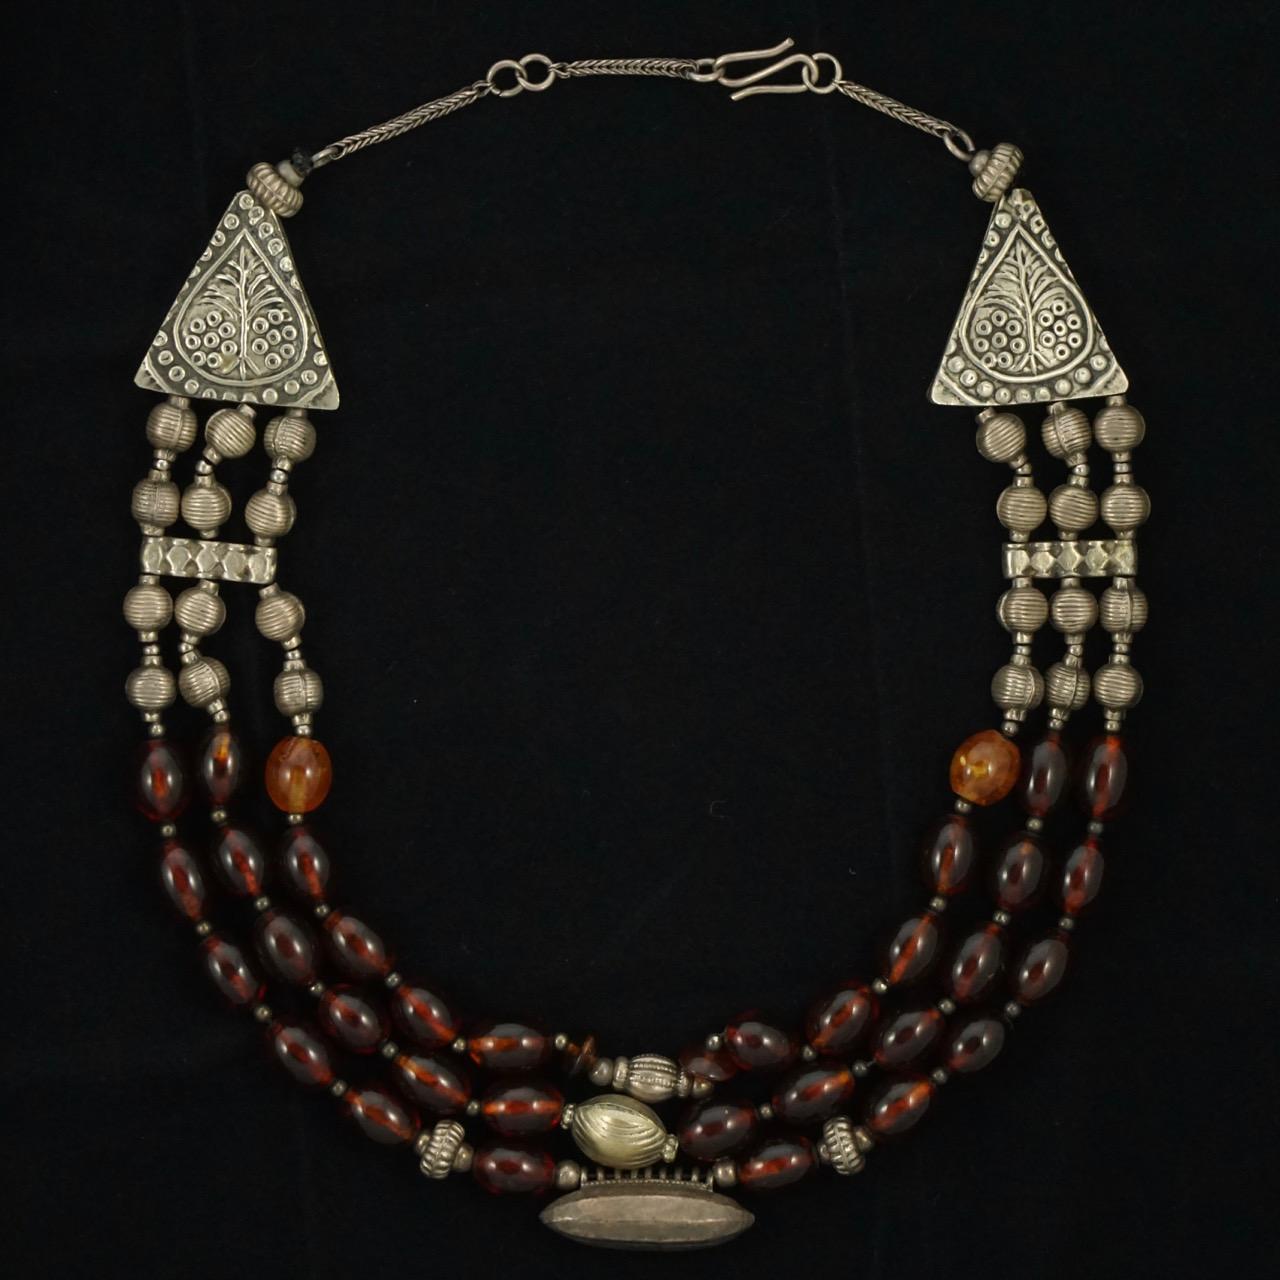 Hand Made Silver Tone and Triple Strand Polished Cognac Amber Bead Necklace For Sale 4